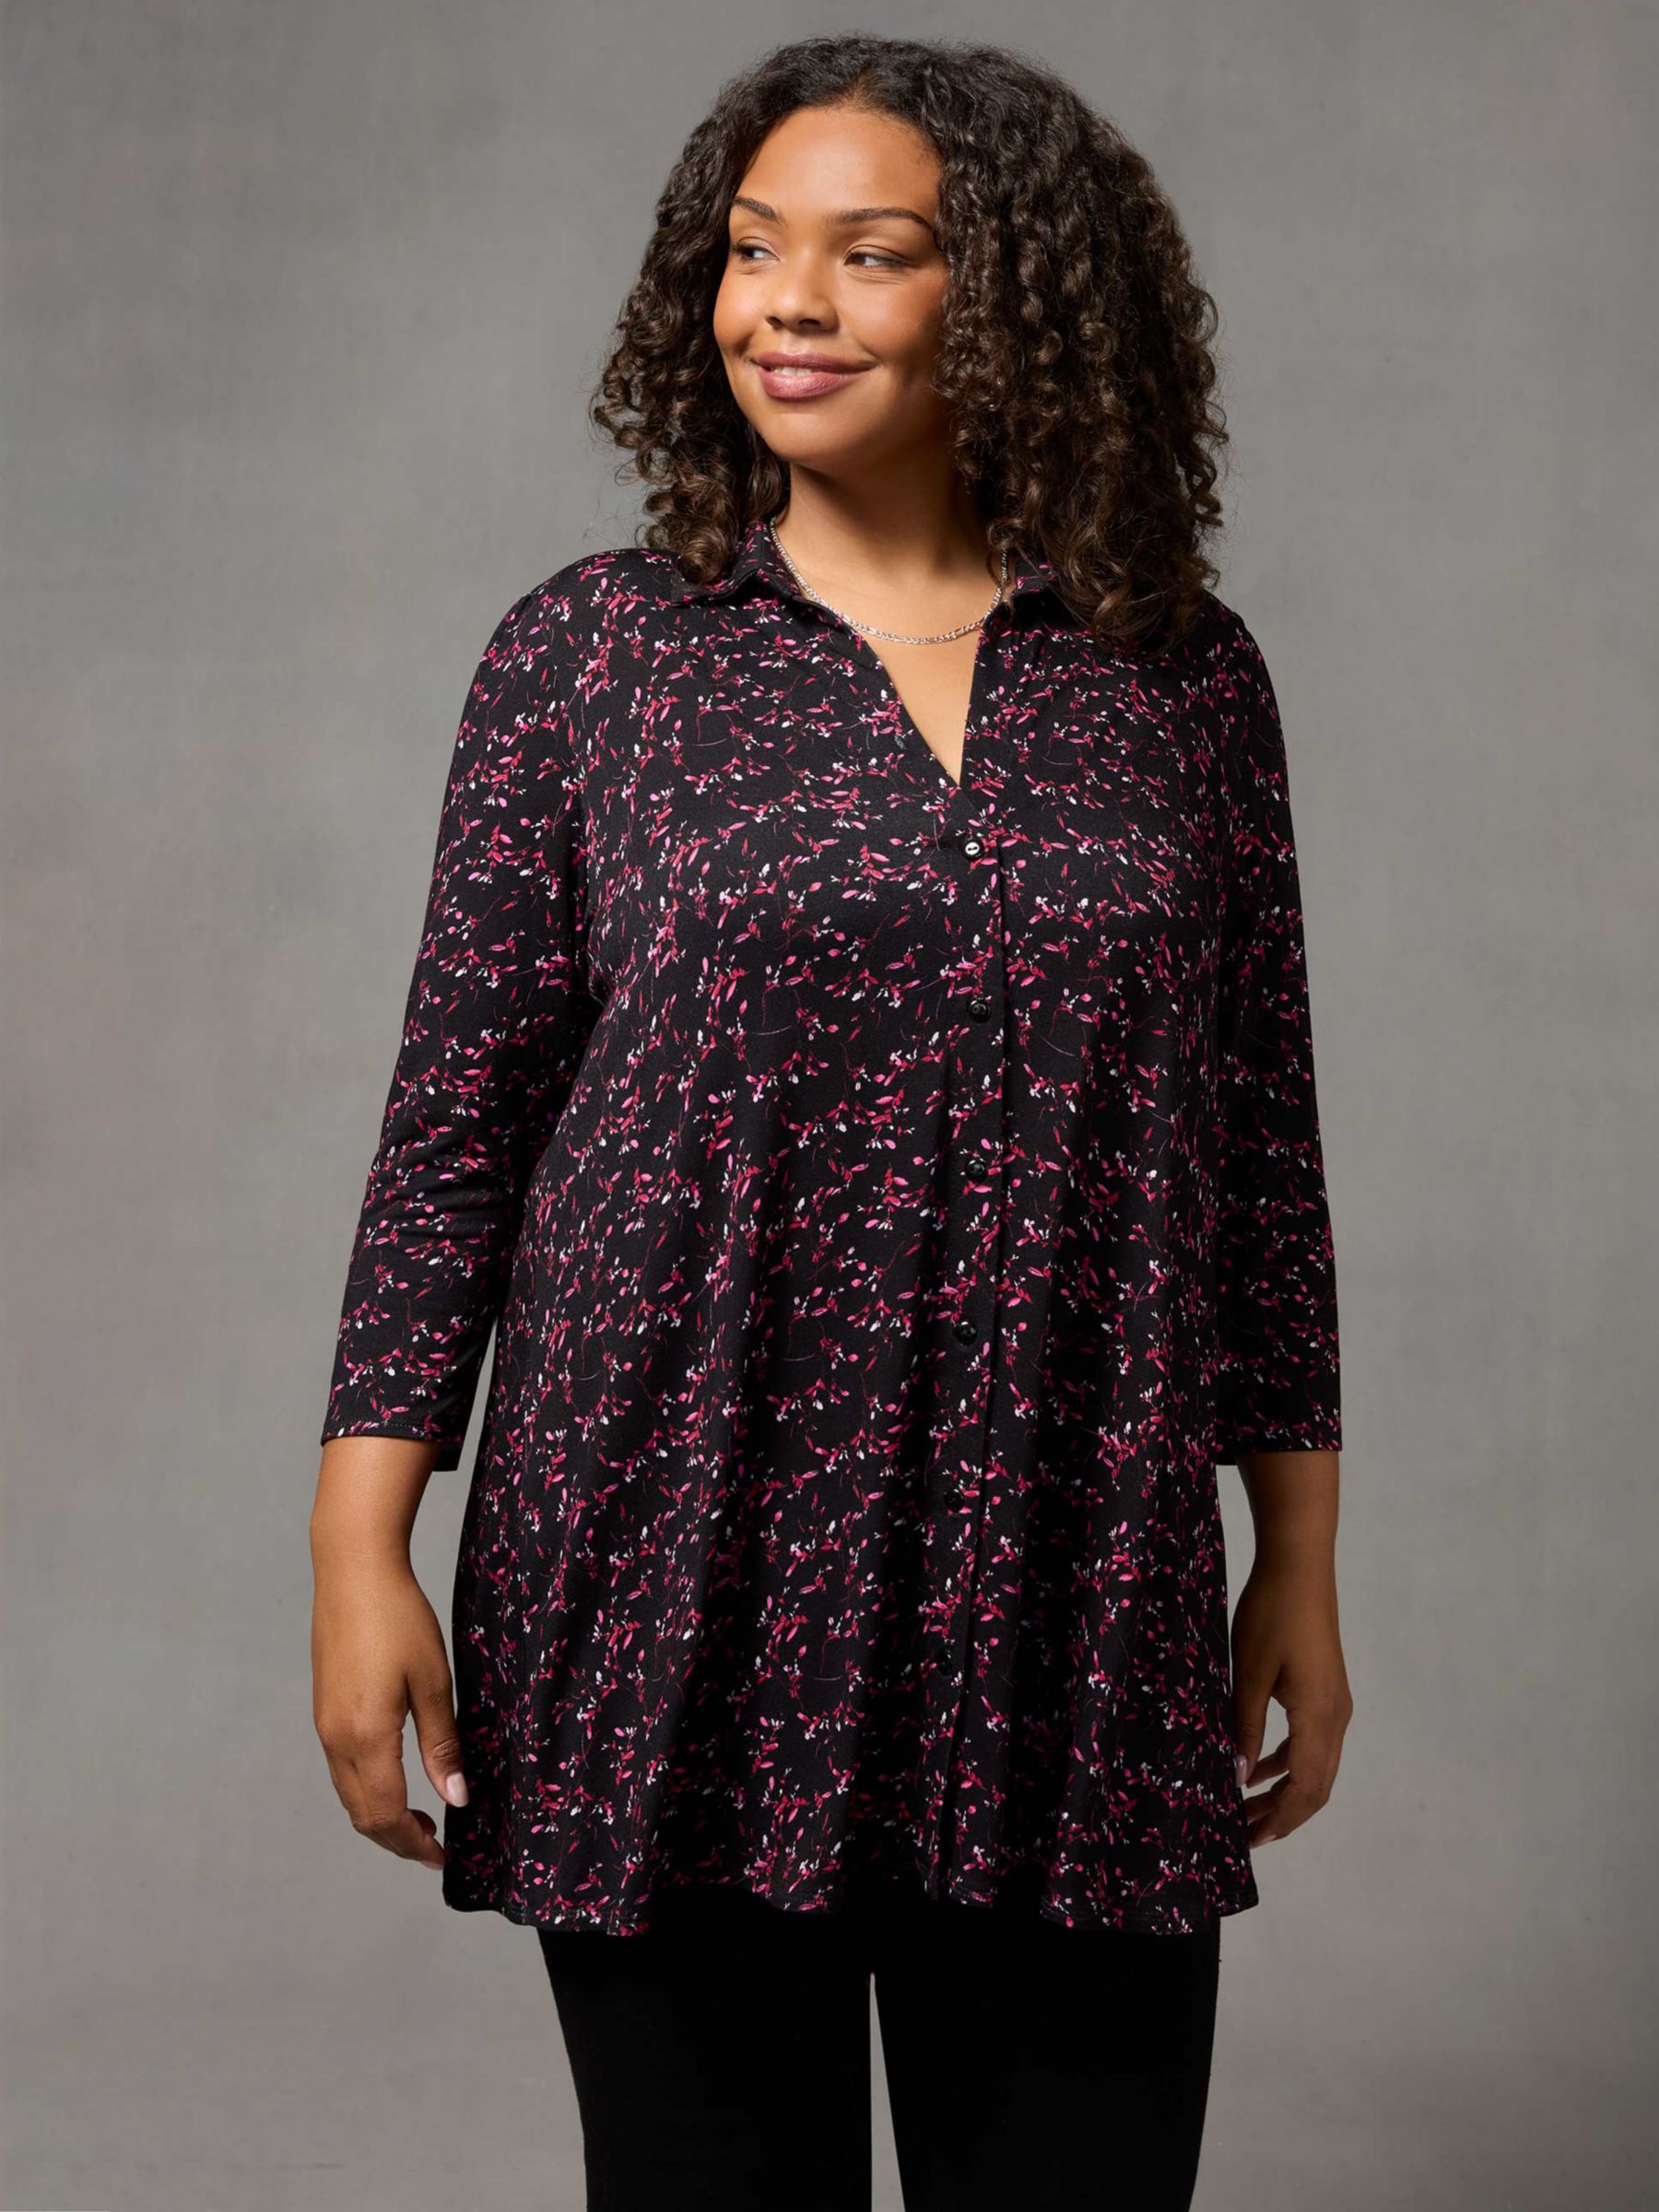 Bulotus Plus Size Blouses for Women, Loose Fit Tunics or Tops to